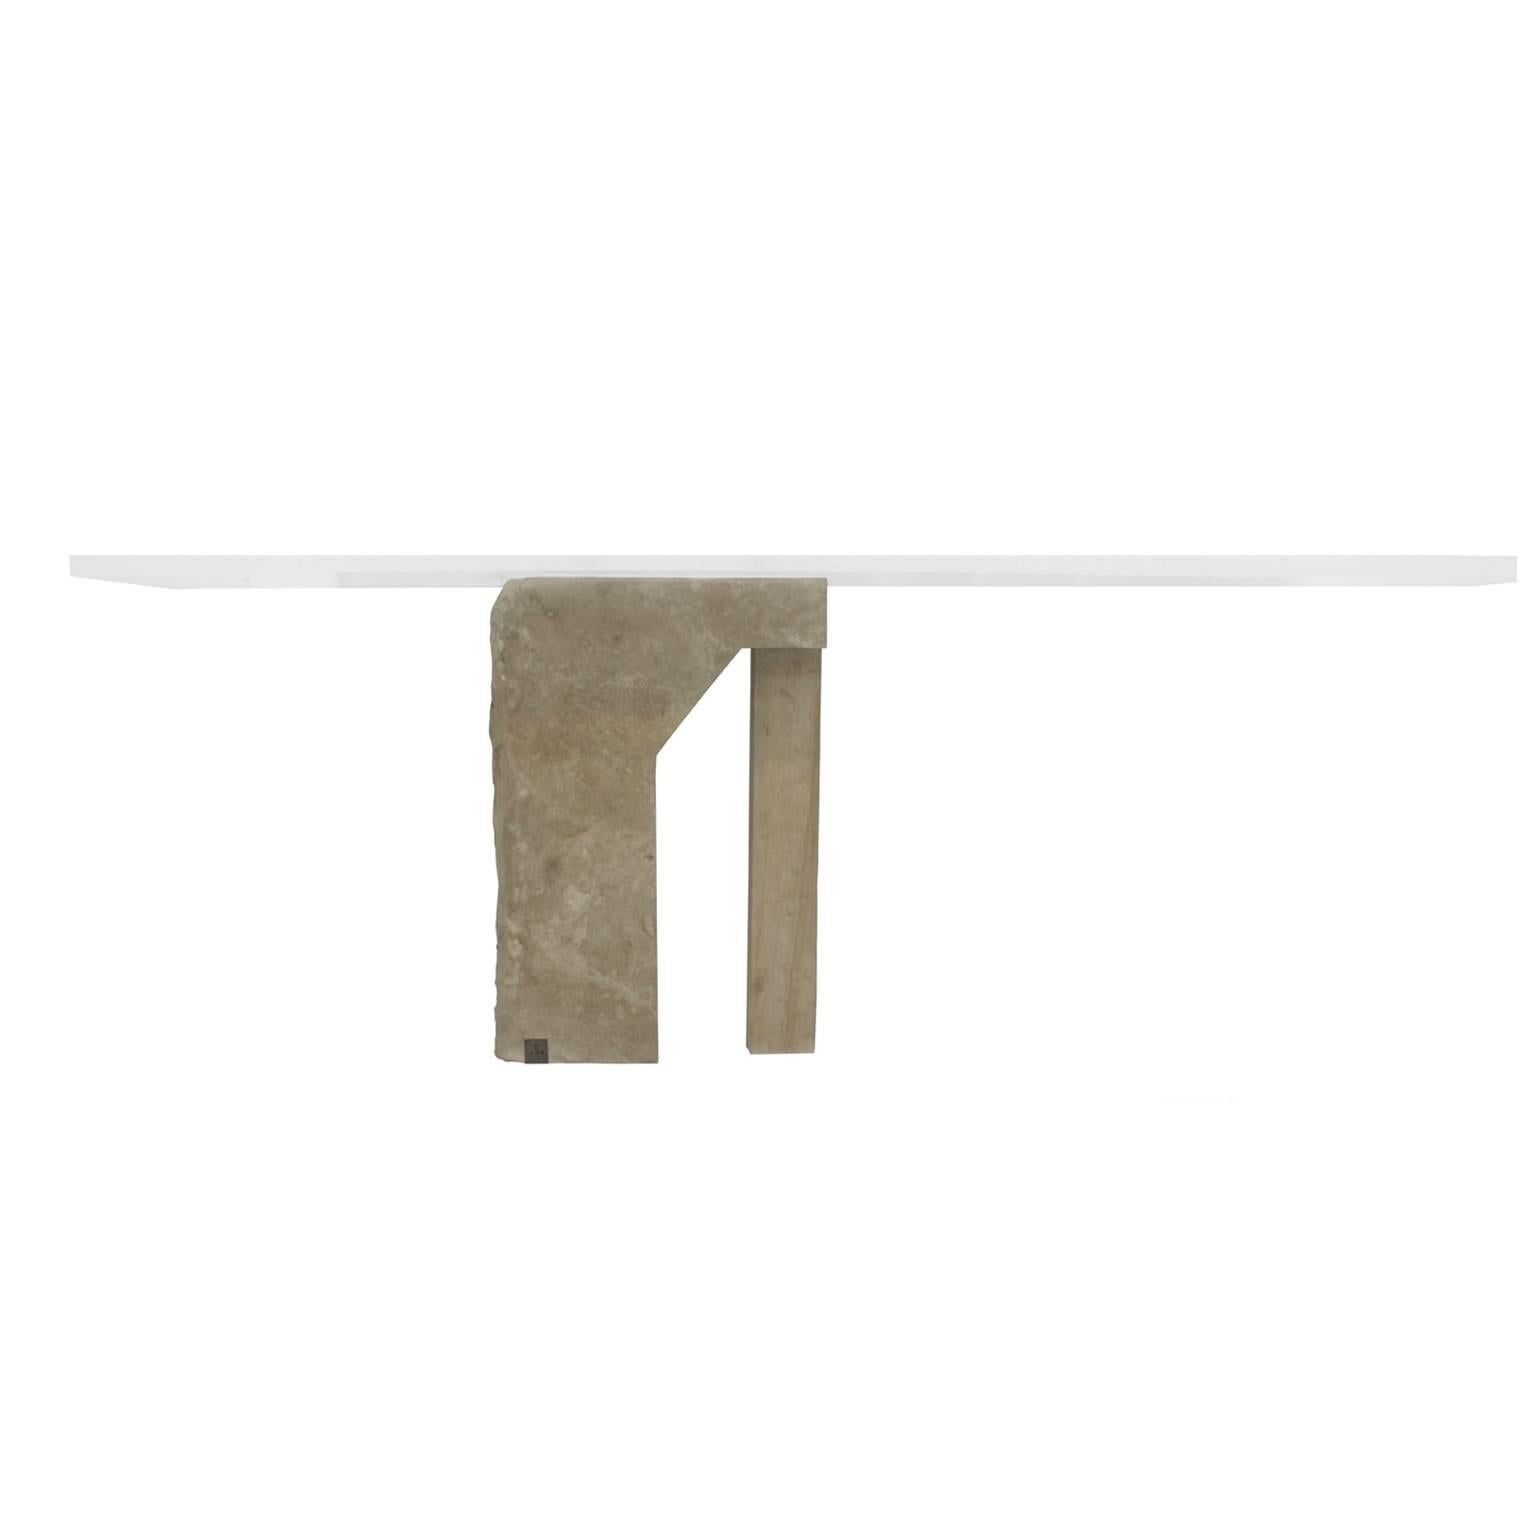 Brazilian Contemporary Furniture
Designer: Gustavo Neves
AEon Collection
Pedra desk
Materials: stone (limestone), metal (brass) darkened with manual treatment, manually sanded acrylic.
Brazil
2017
For this project, Gustavo Neves designed the